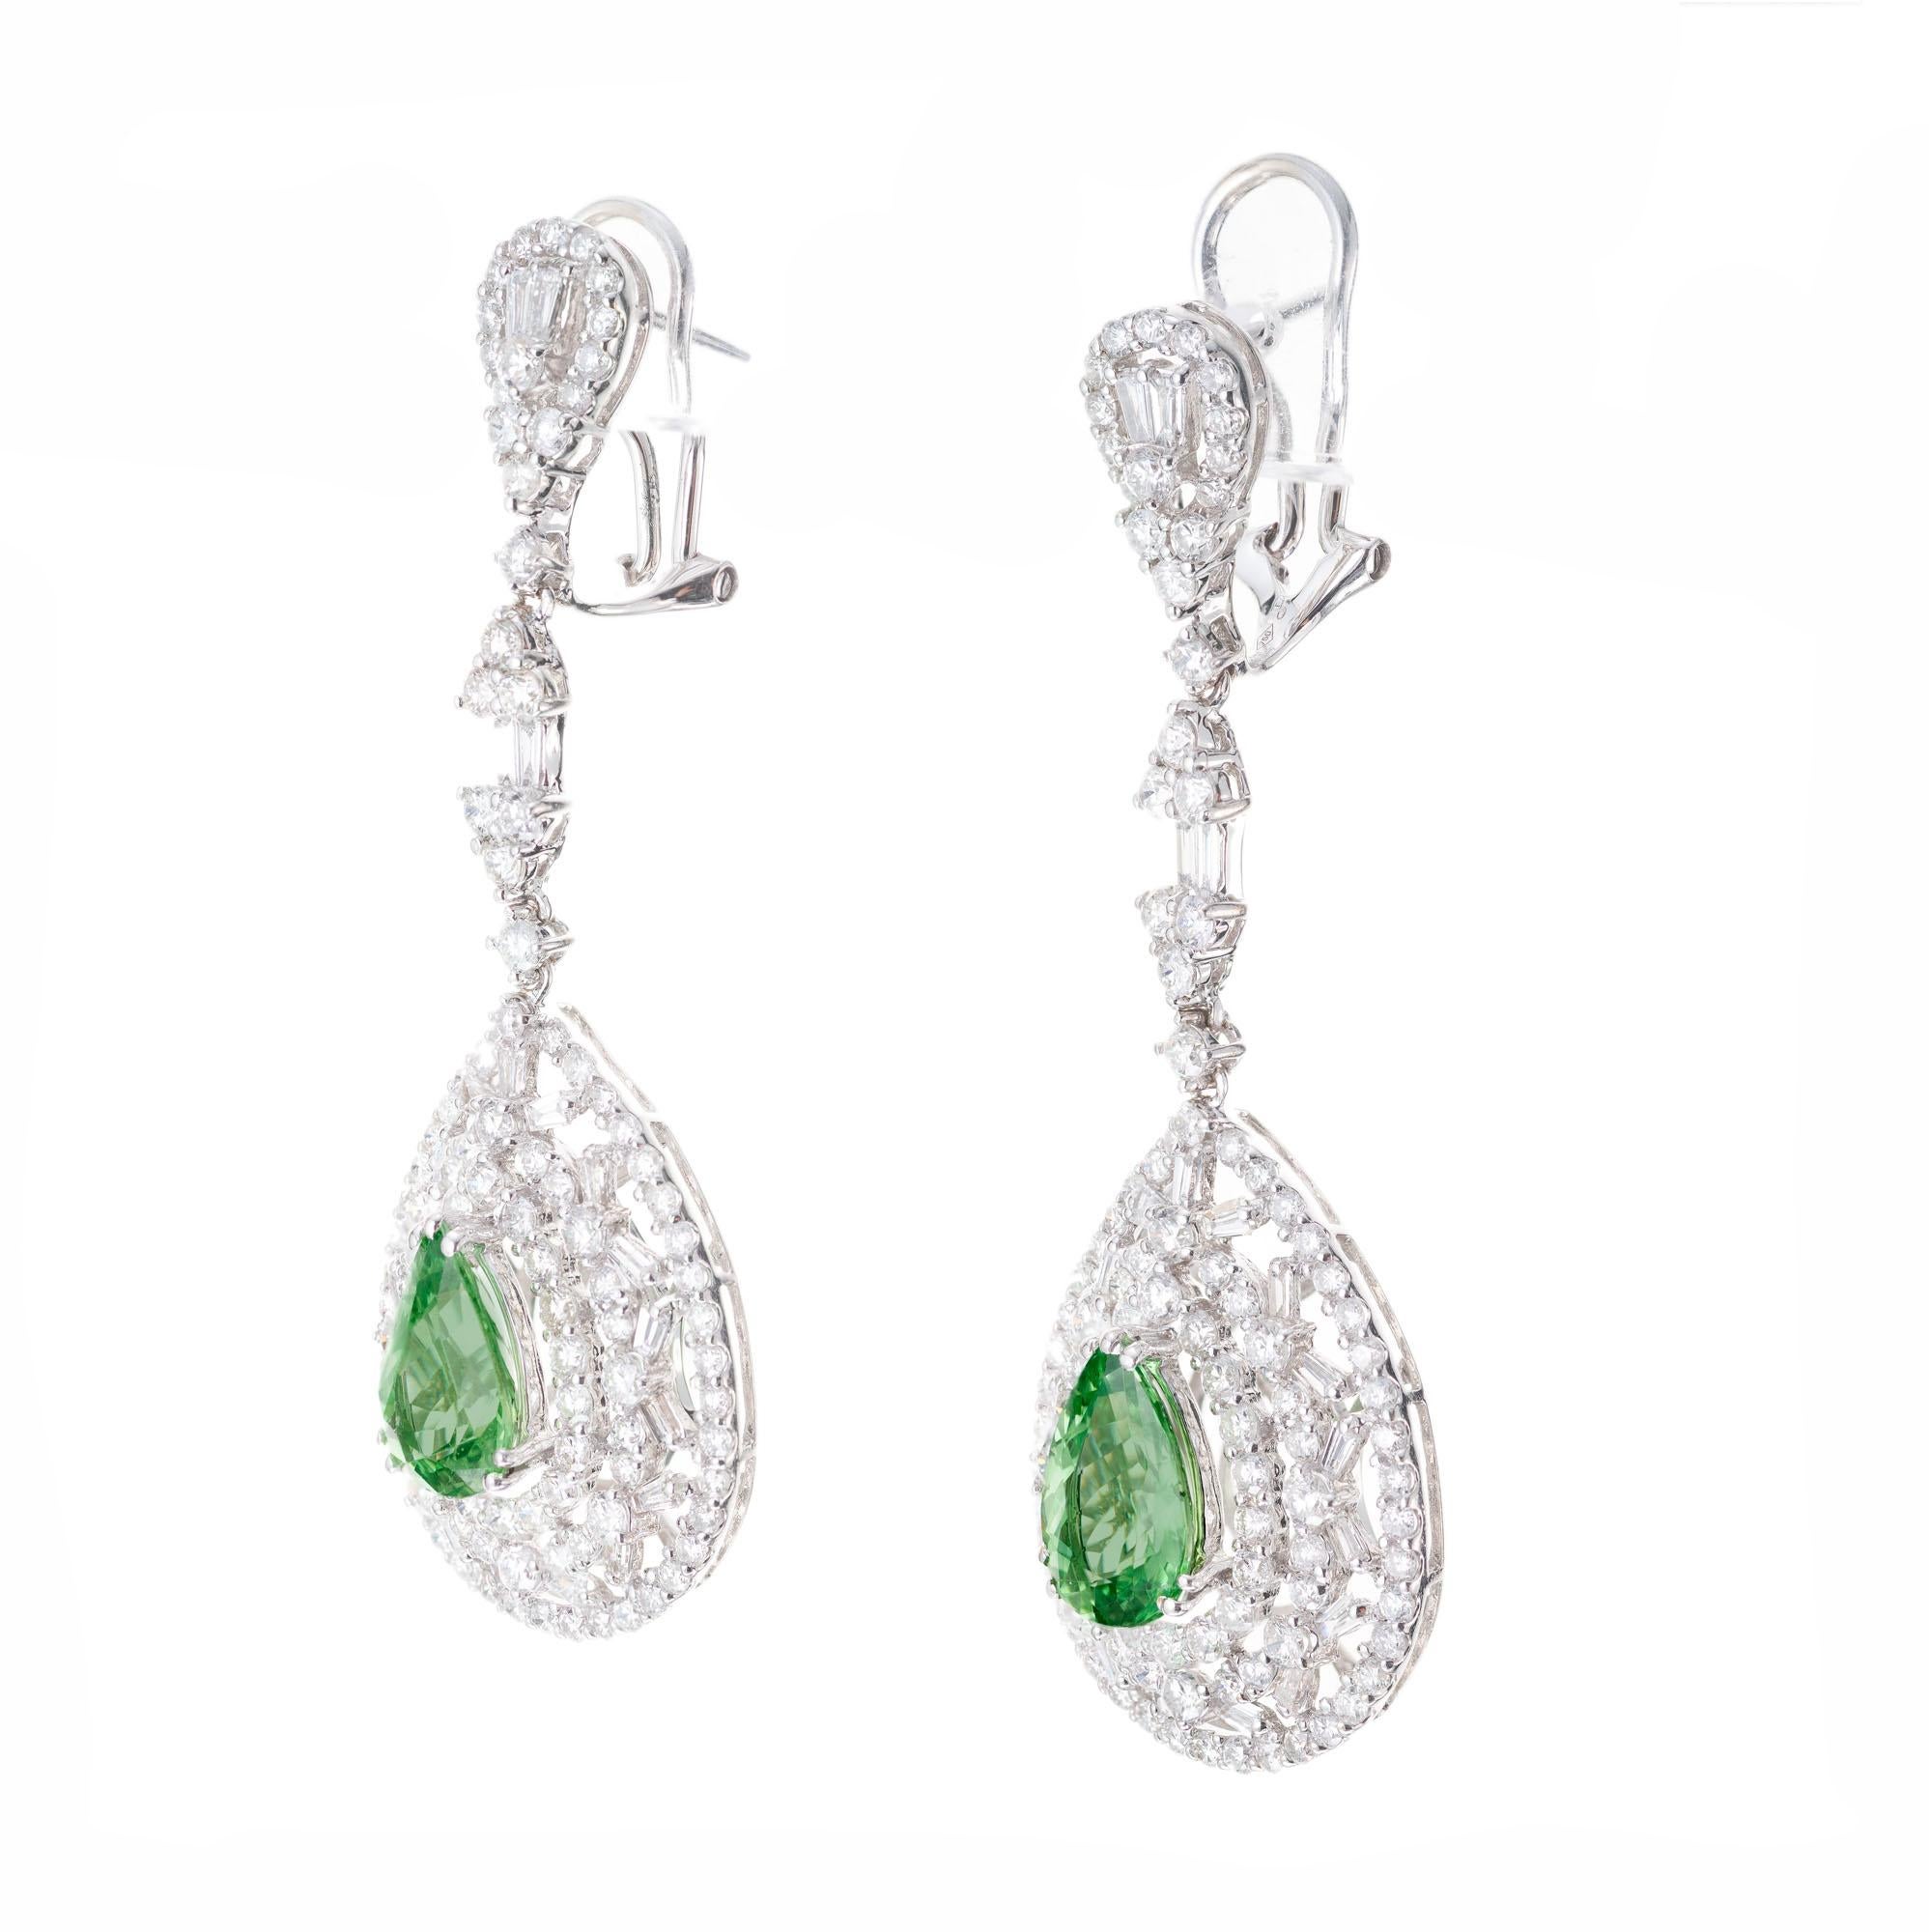 Tsavorite and diamond dangle earrings. Two center pear shaped green Tsavorite garnets in an open work 18k white gold setting round and baguette cut accent diamonds. GIA certified. 

2 pear Tsavorite garnets, approx. total weight, weight 3.50cts, VS